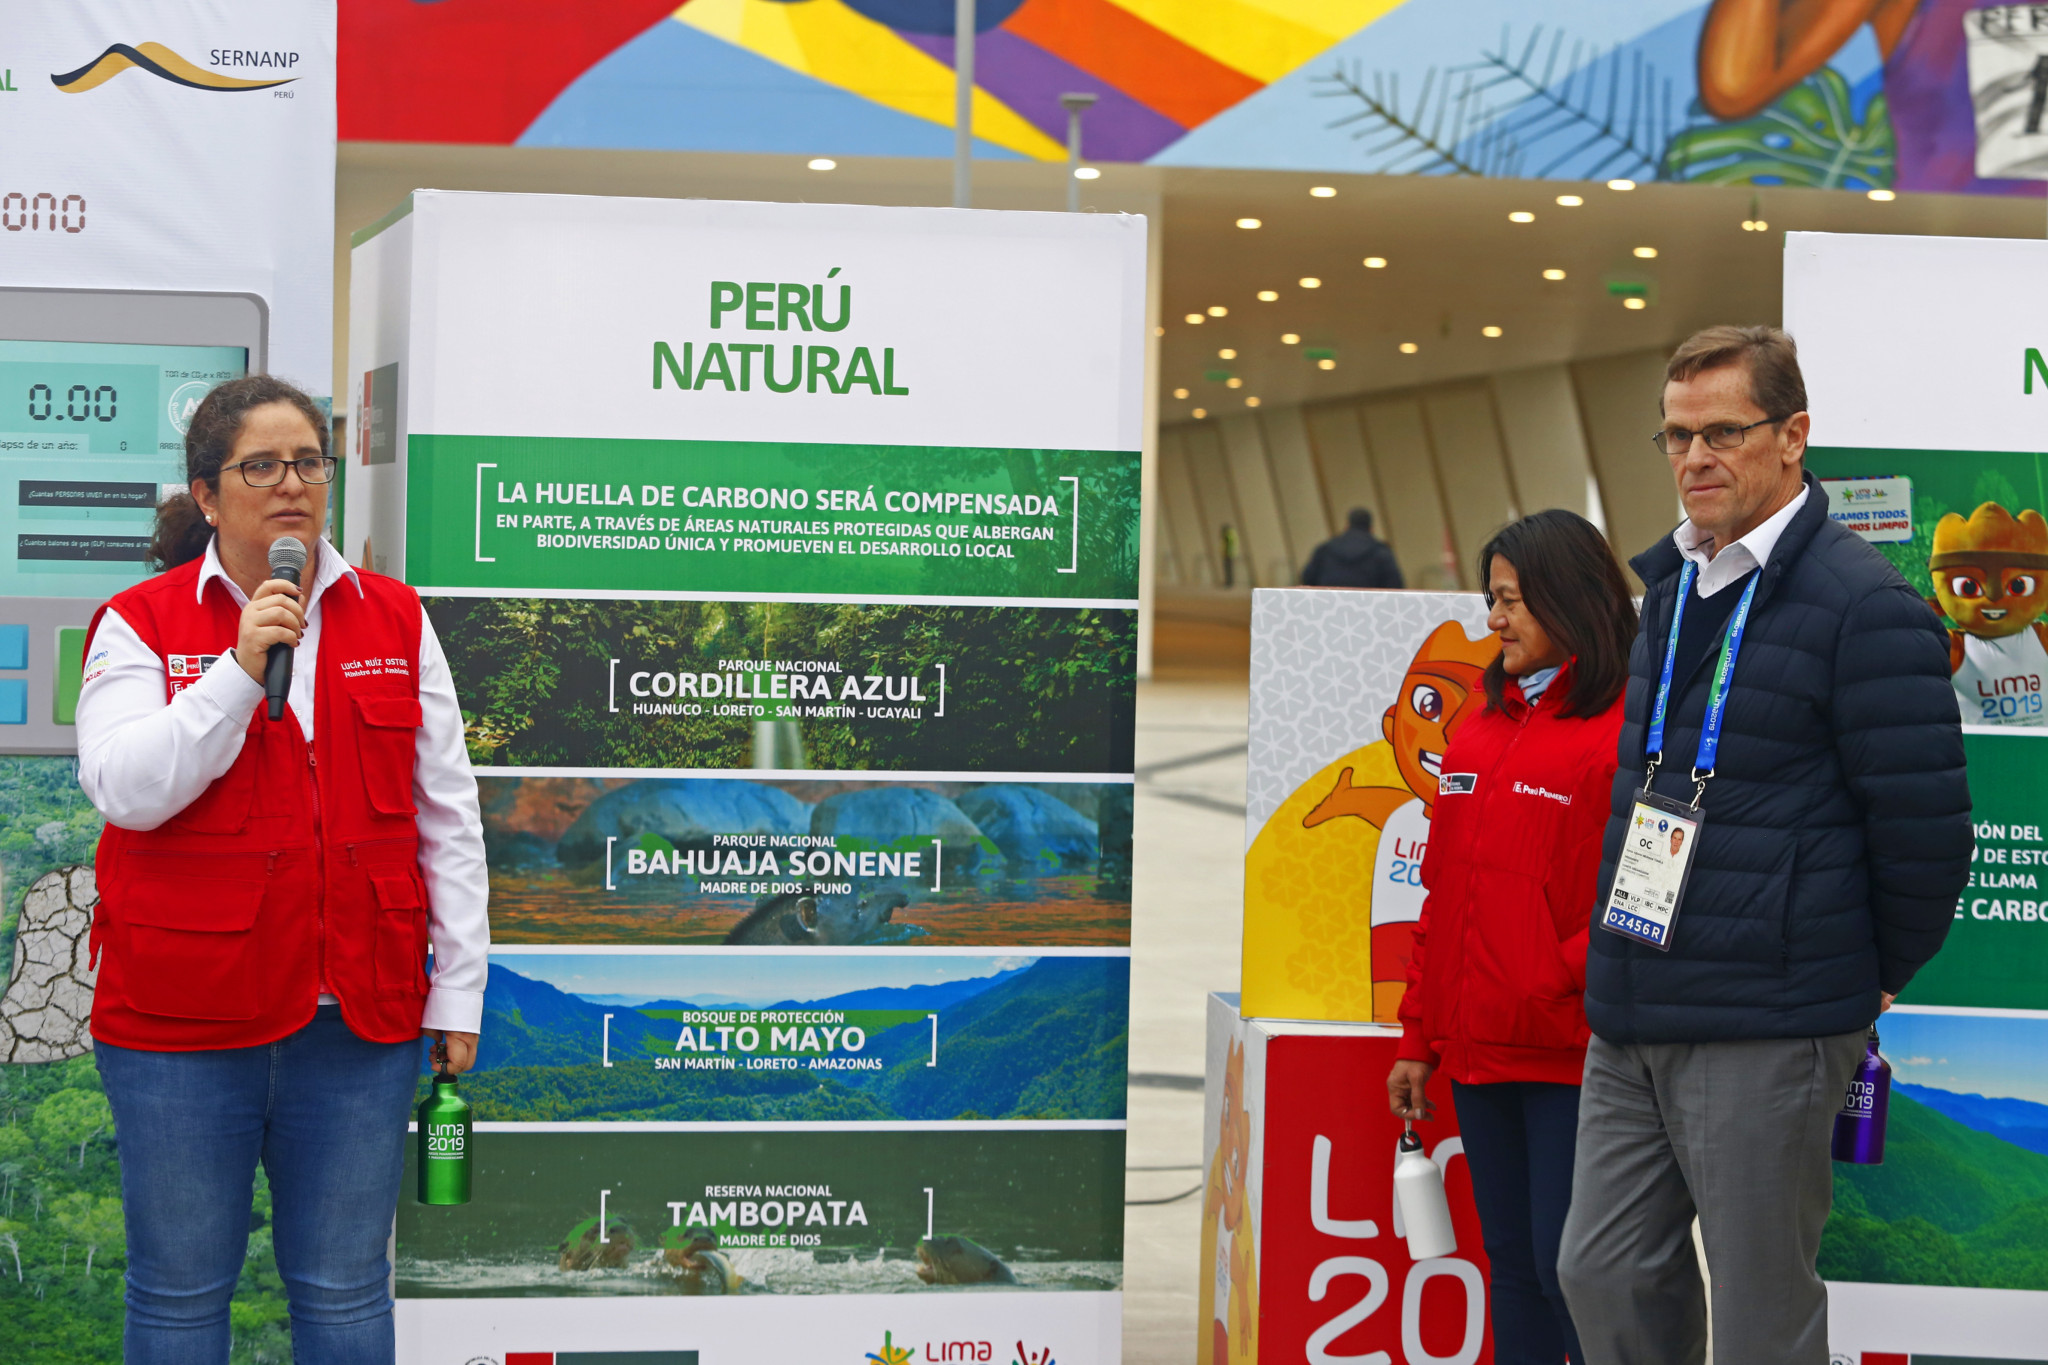 Lima 2019 presents environmental action plan in bid to hold "green" Pan American Games